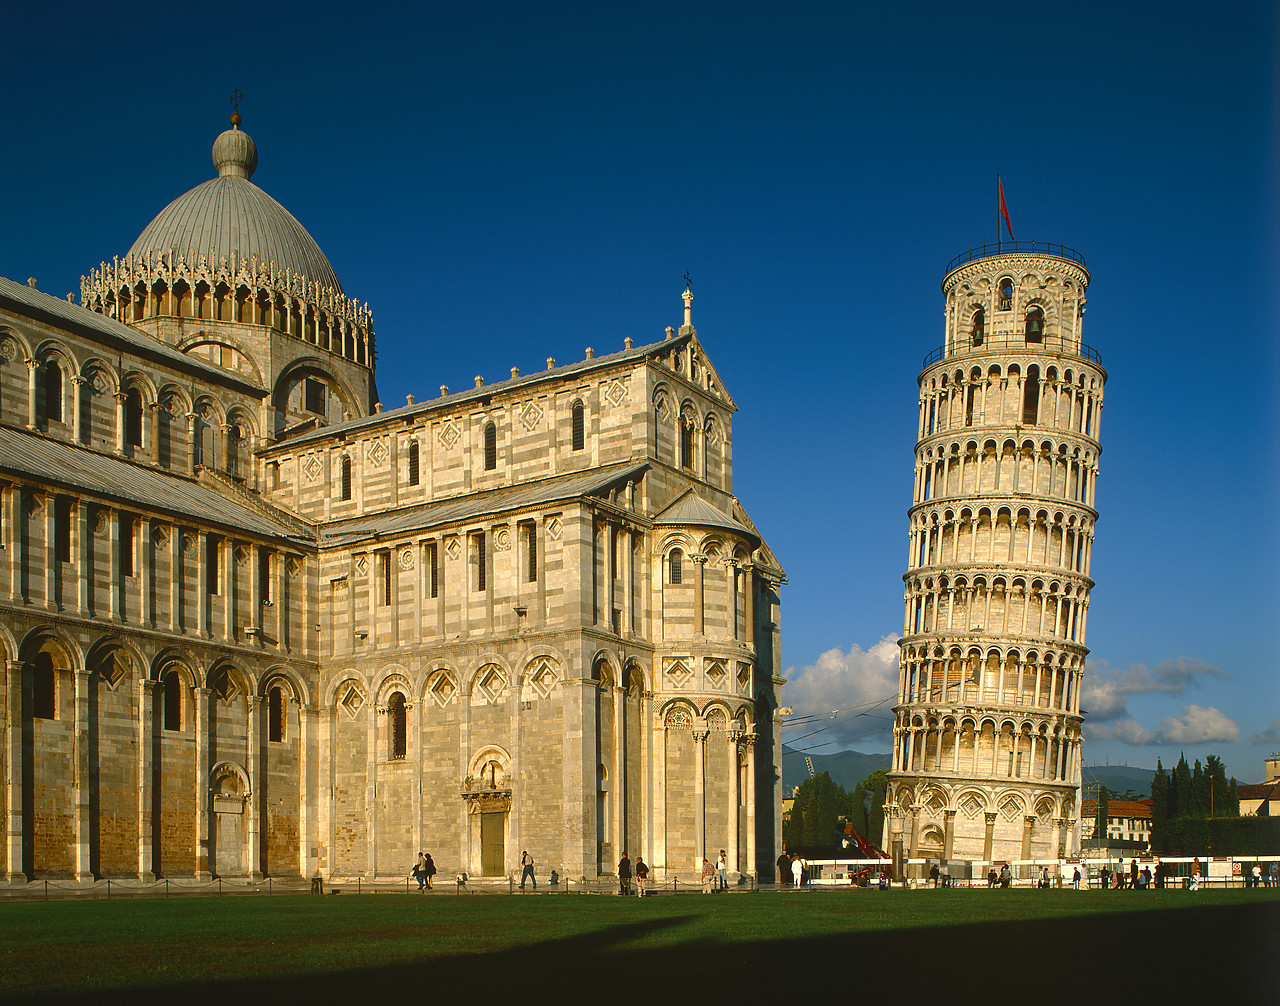 #010318-2 - The Leaning Tower of Pisa & Cathedral, Pisa, Italy